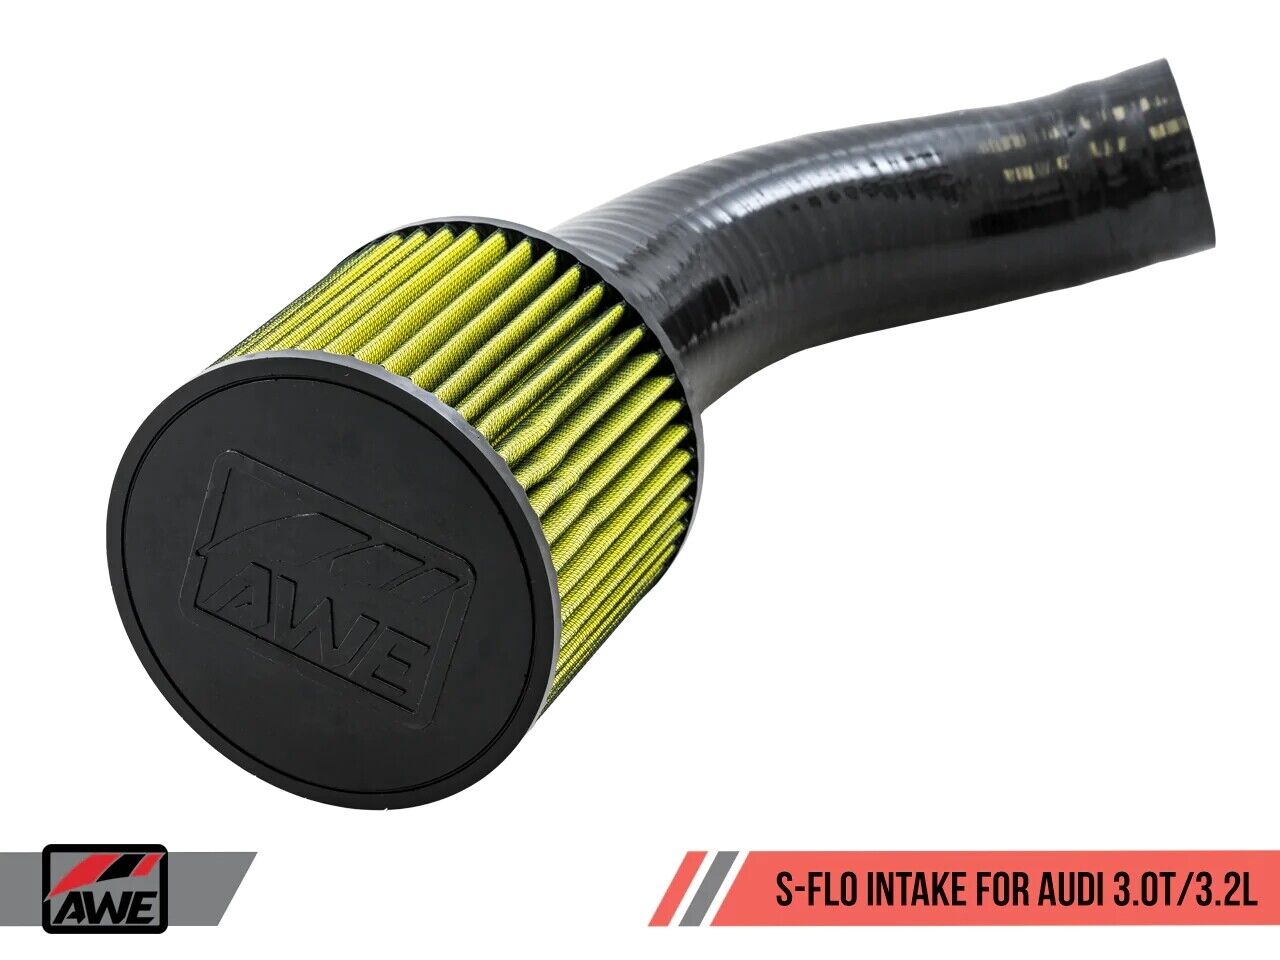 AWE Tuning S-FLO Air Intake System (2660-13012) for Audi B8 3.0T / 3.2L